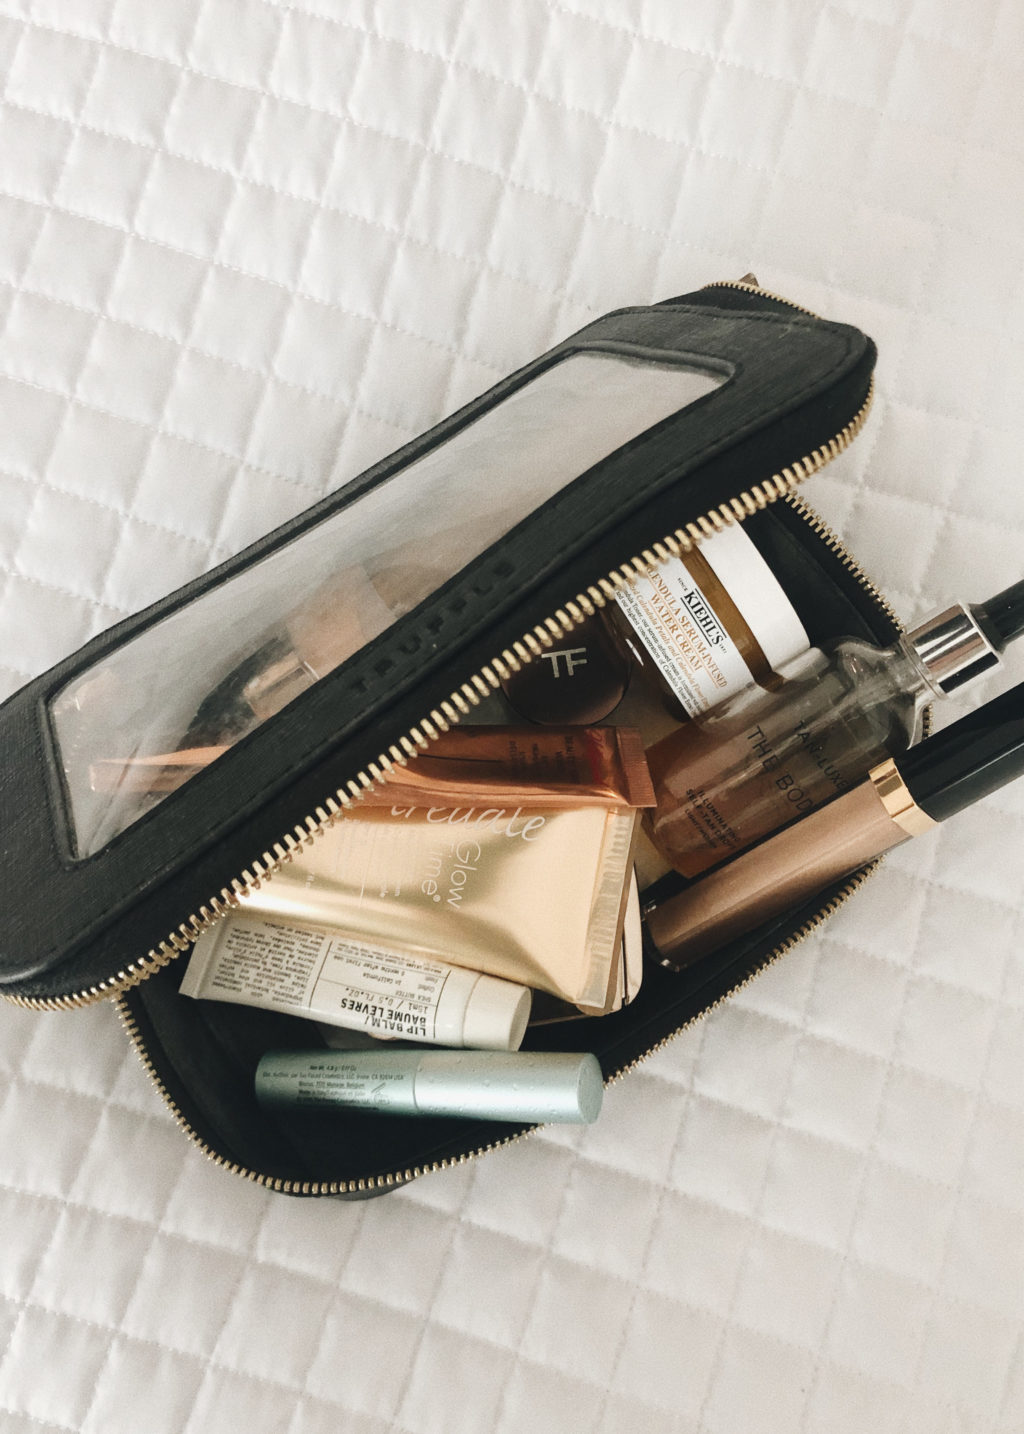 10 Products to Upgrade Your Summer Beauty Bag